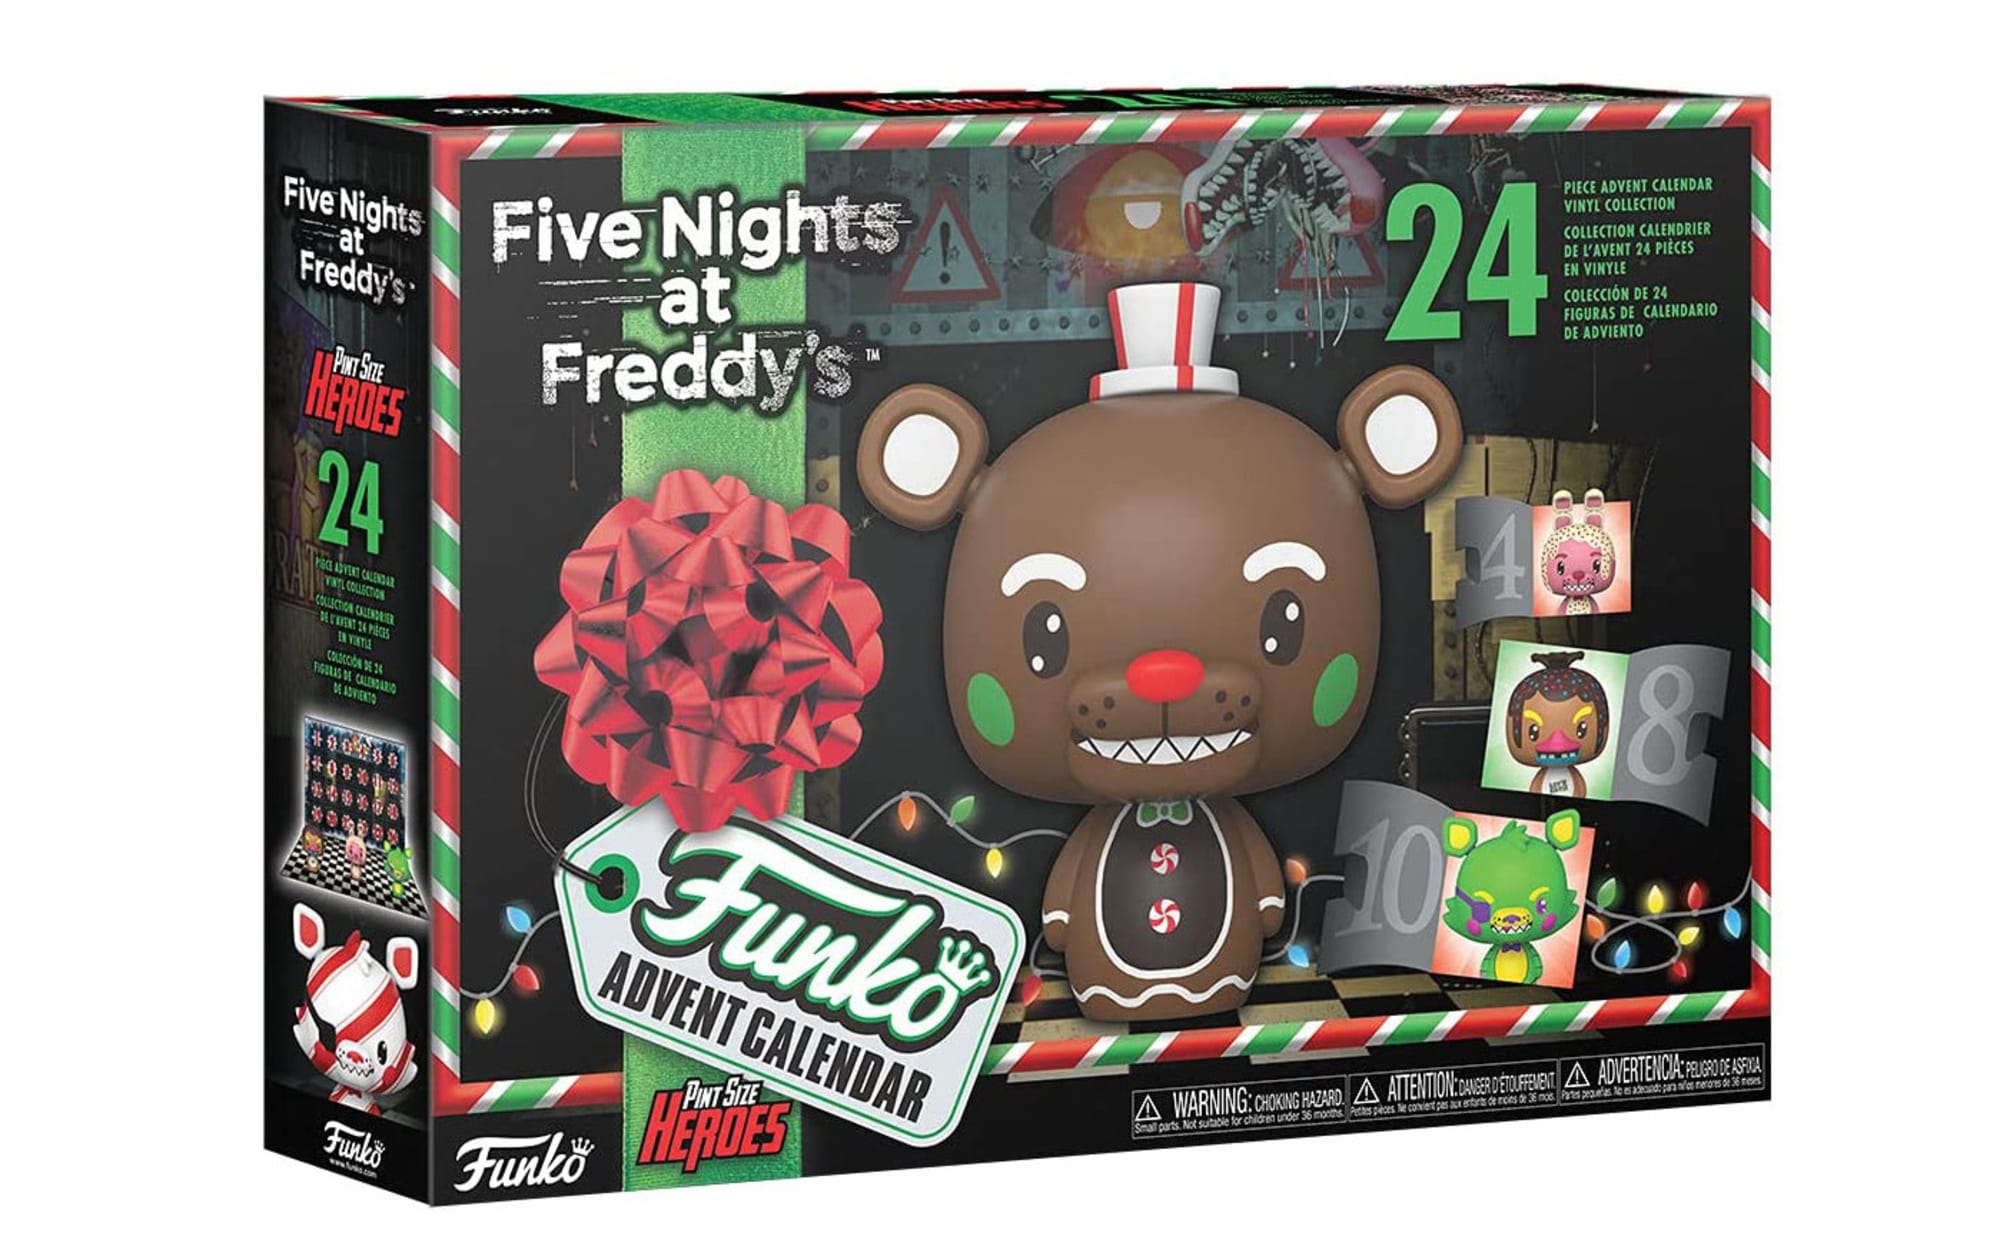 Enjoy the holidays with Funko’s Five Nights at Freddy’s Advent calendar